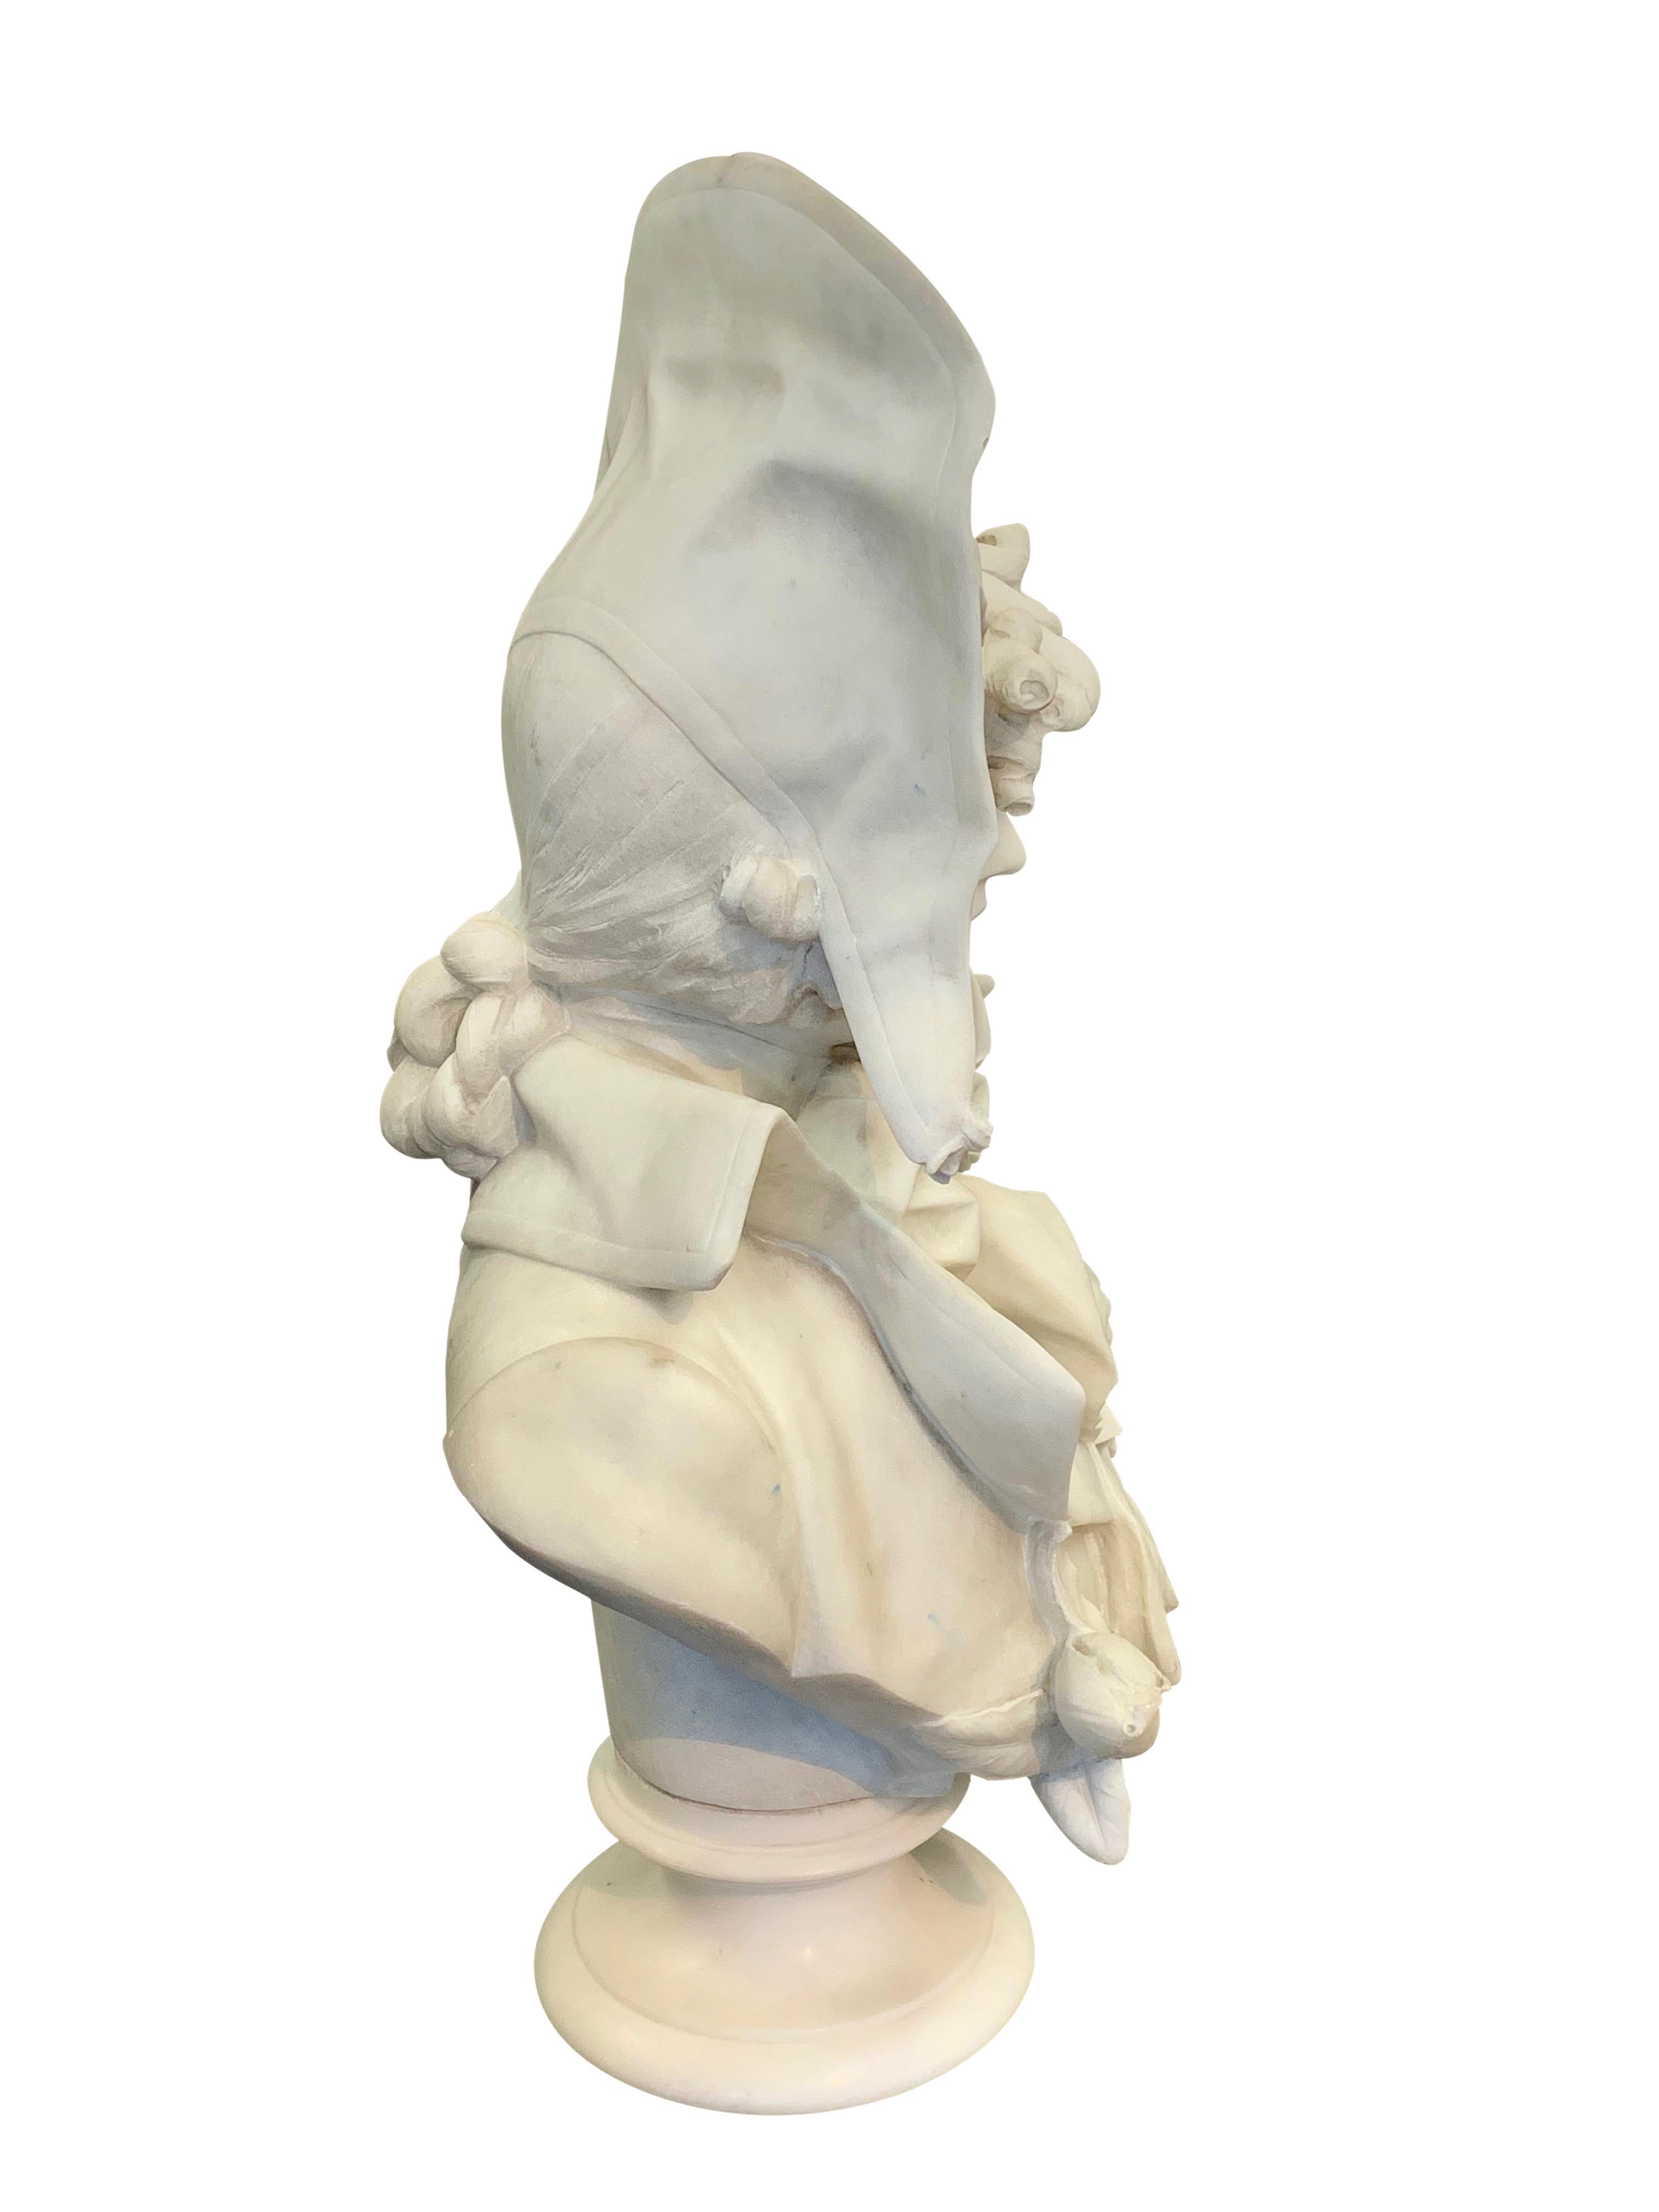 Early 20th Century Antique Italian marble sculpture of a smiling lady by Ferdinando Vichi